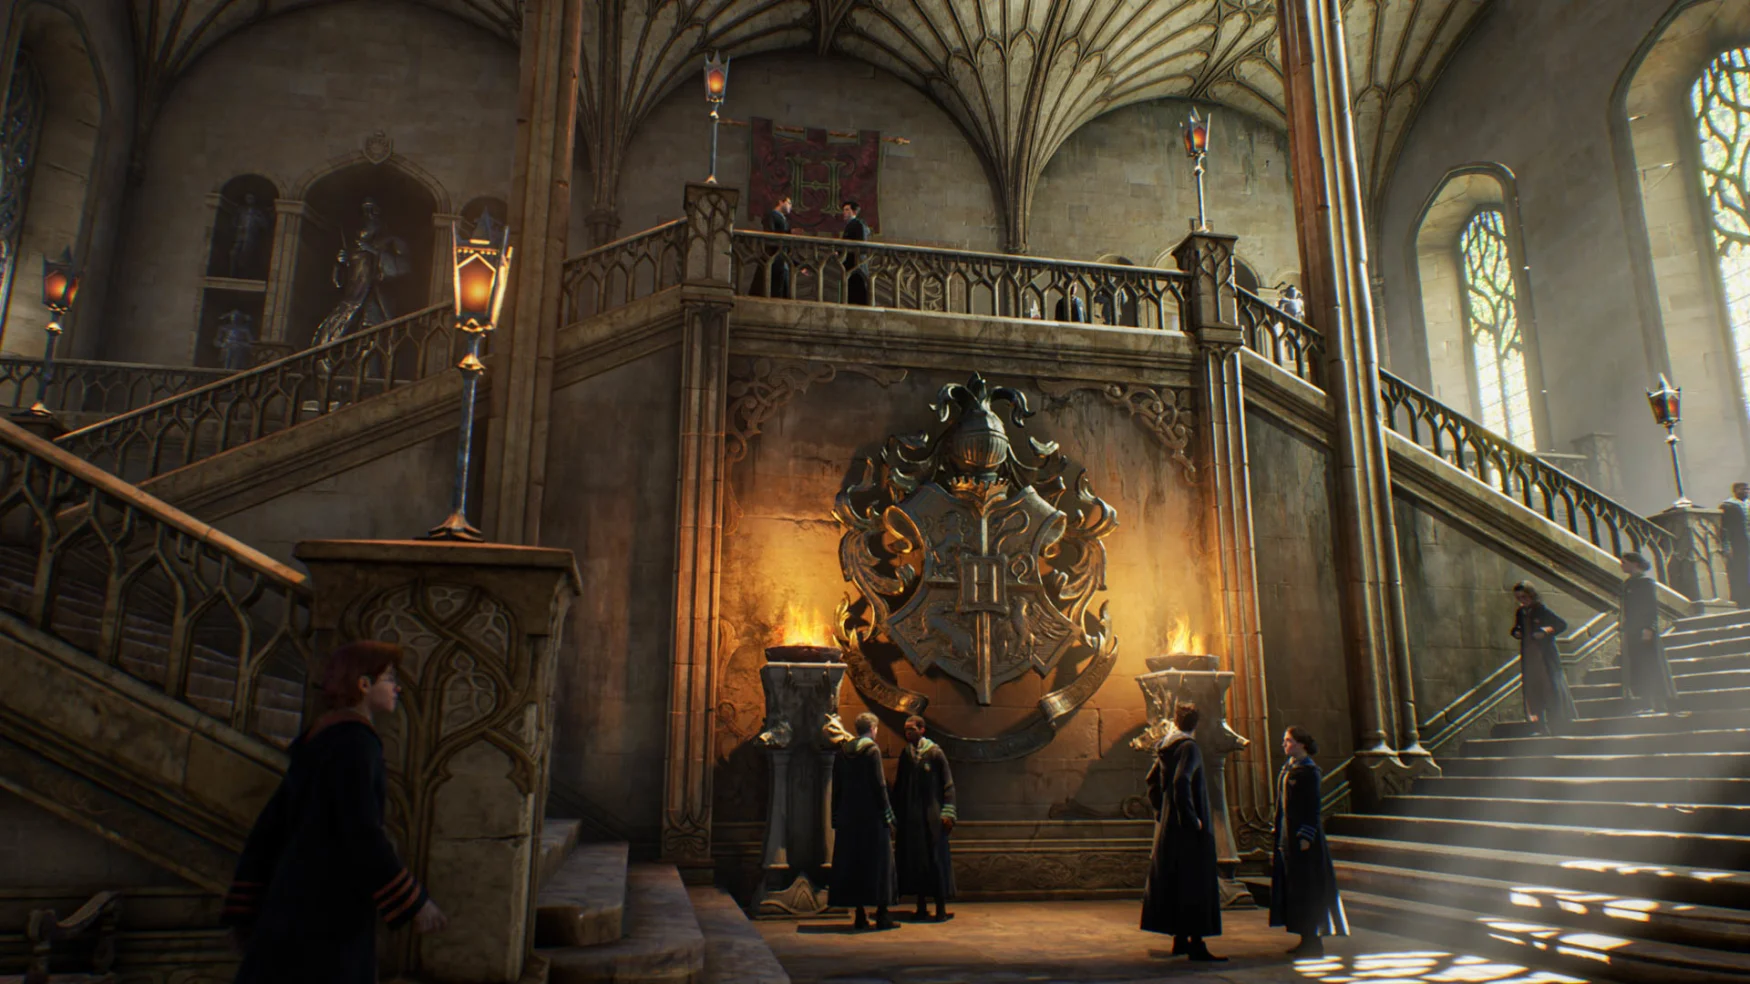 The main hall of Hogwarts fills the space, with students filtering down twin staircases, the school crest large and lit by two fires on pedestals.